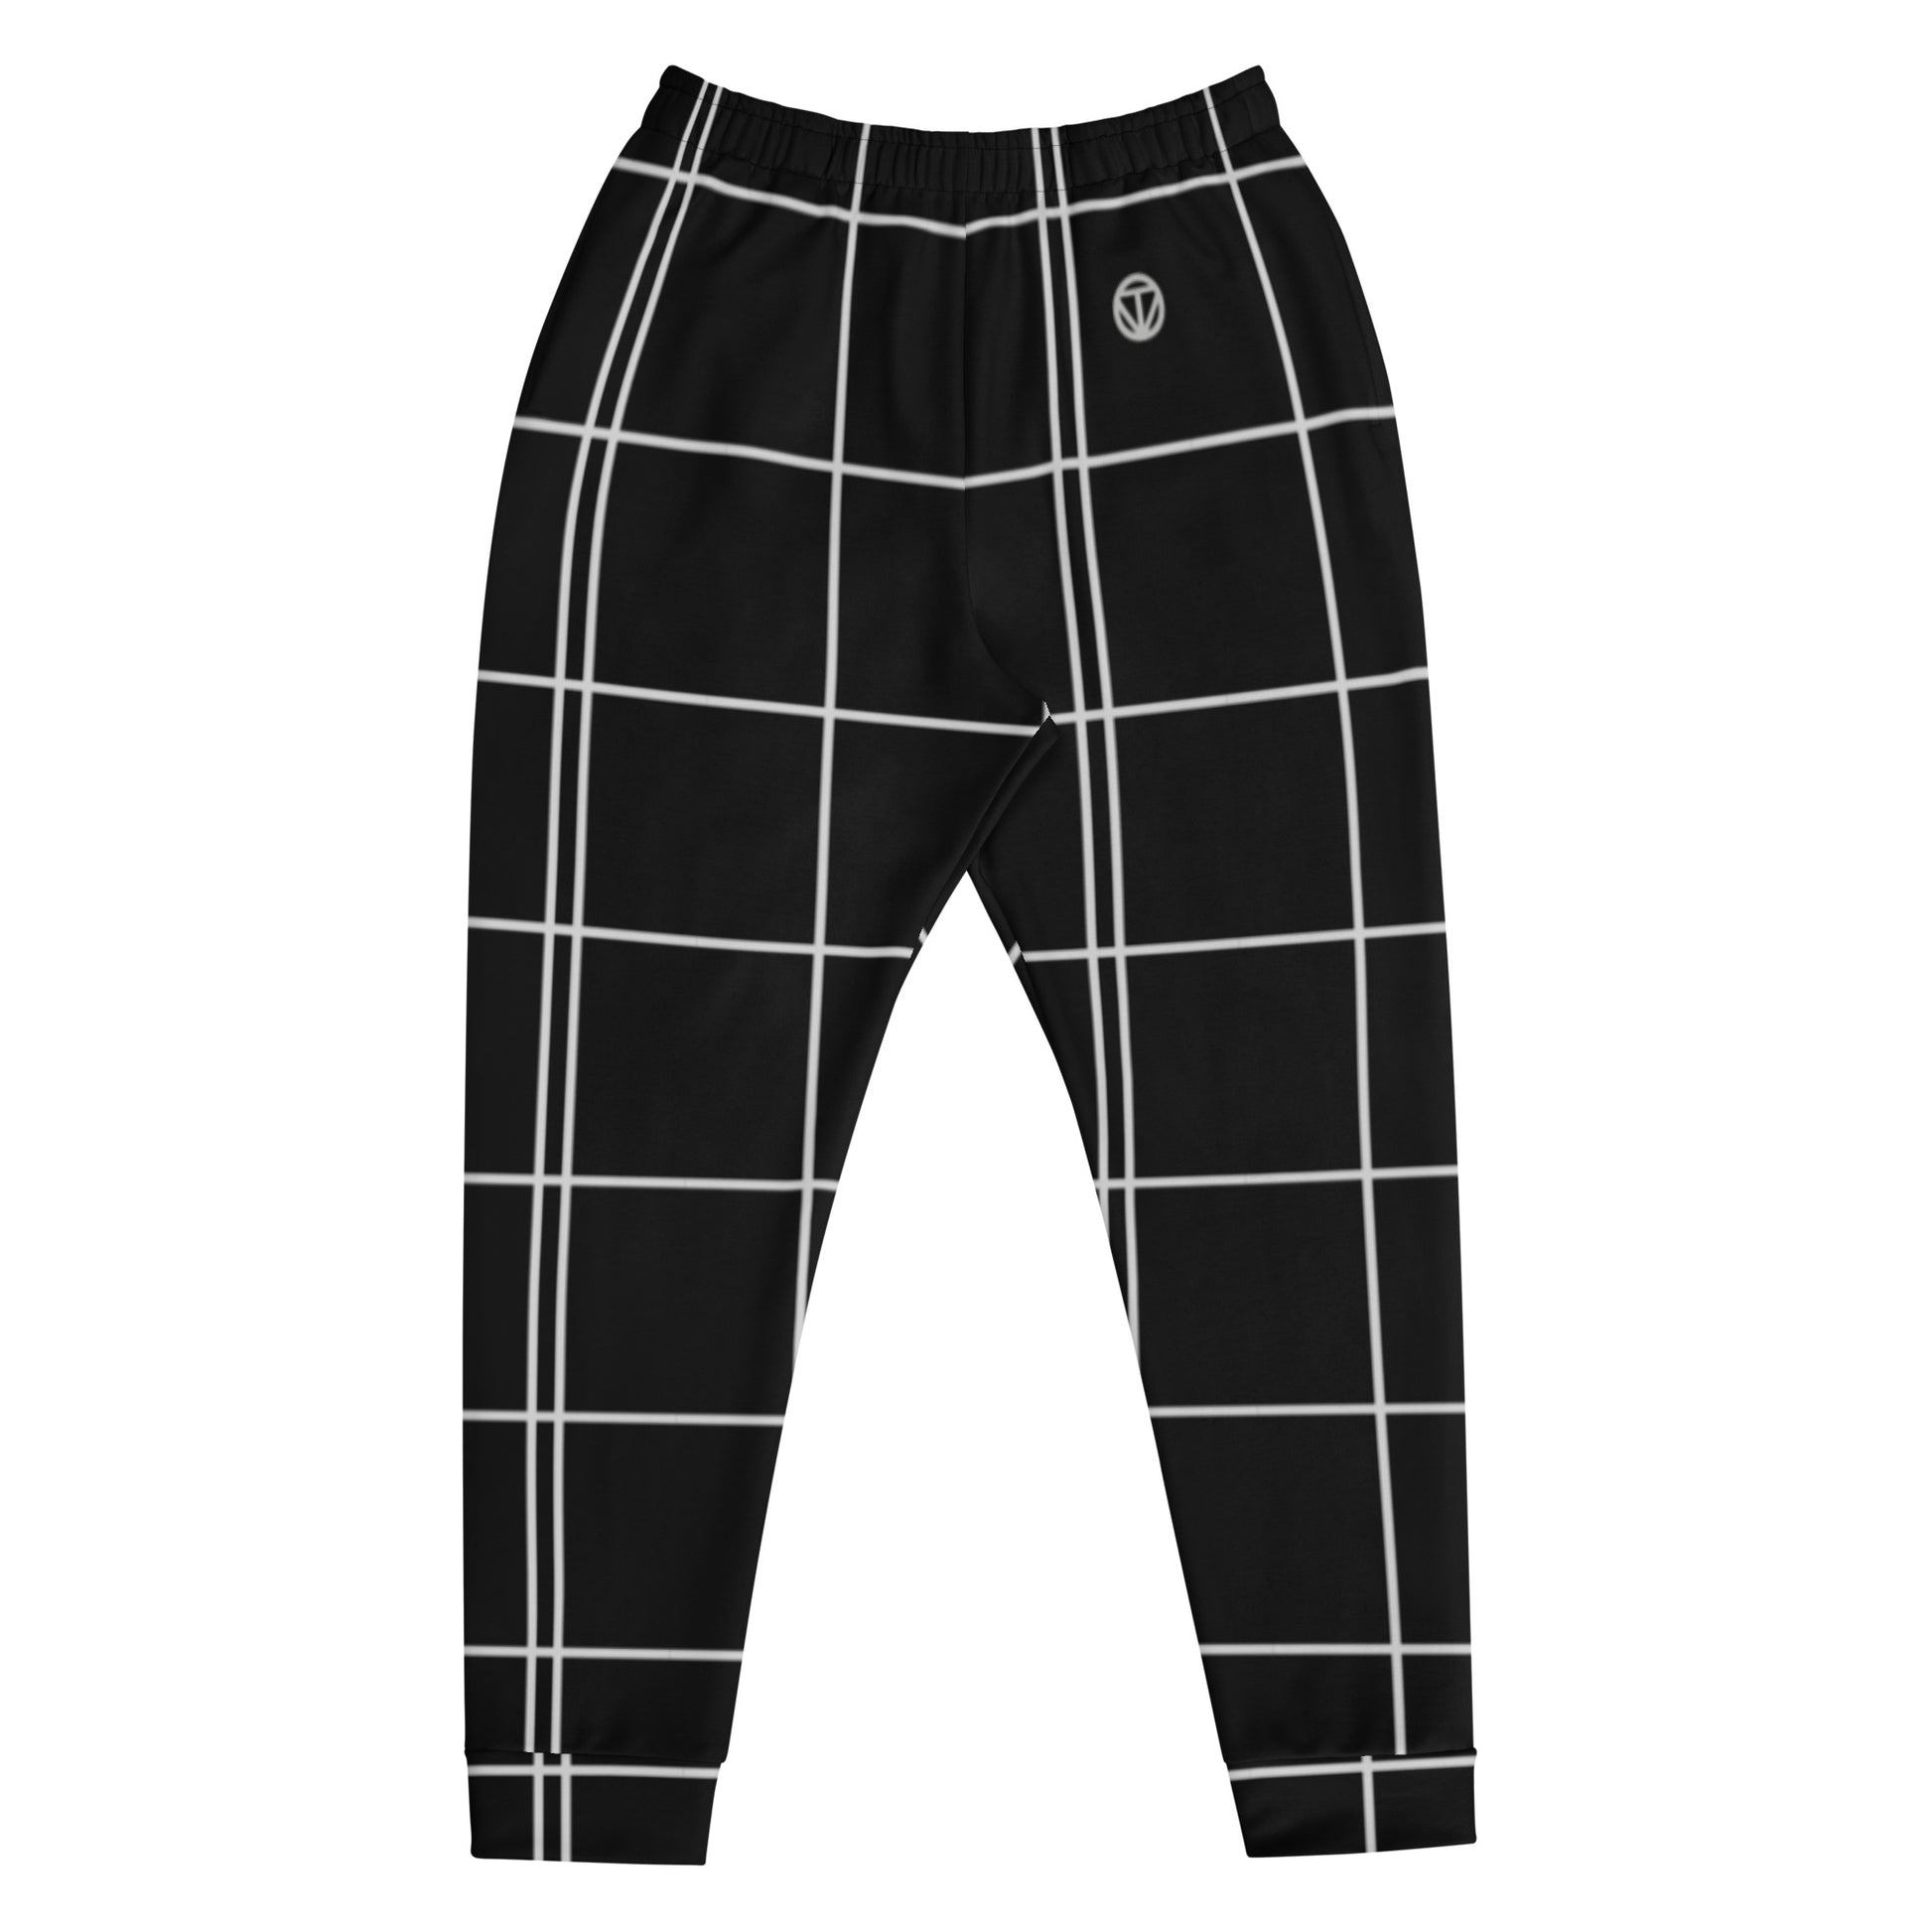 TIME OF VIBES - Men's Joggers LINEUP (Black) - €69.00